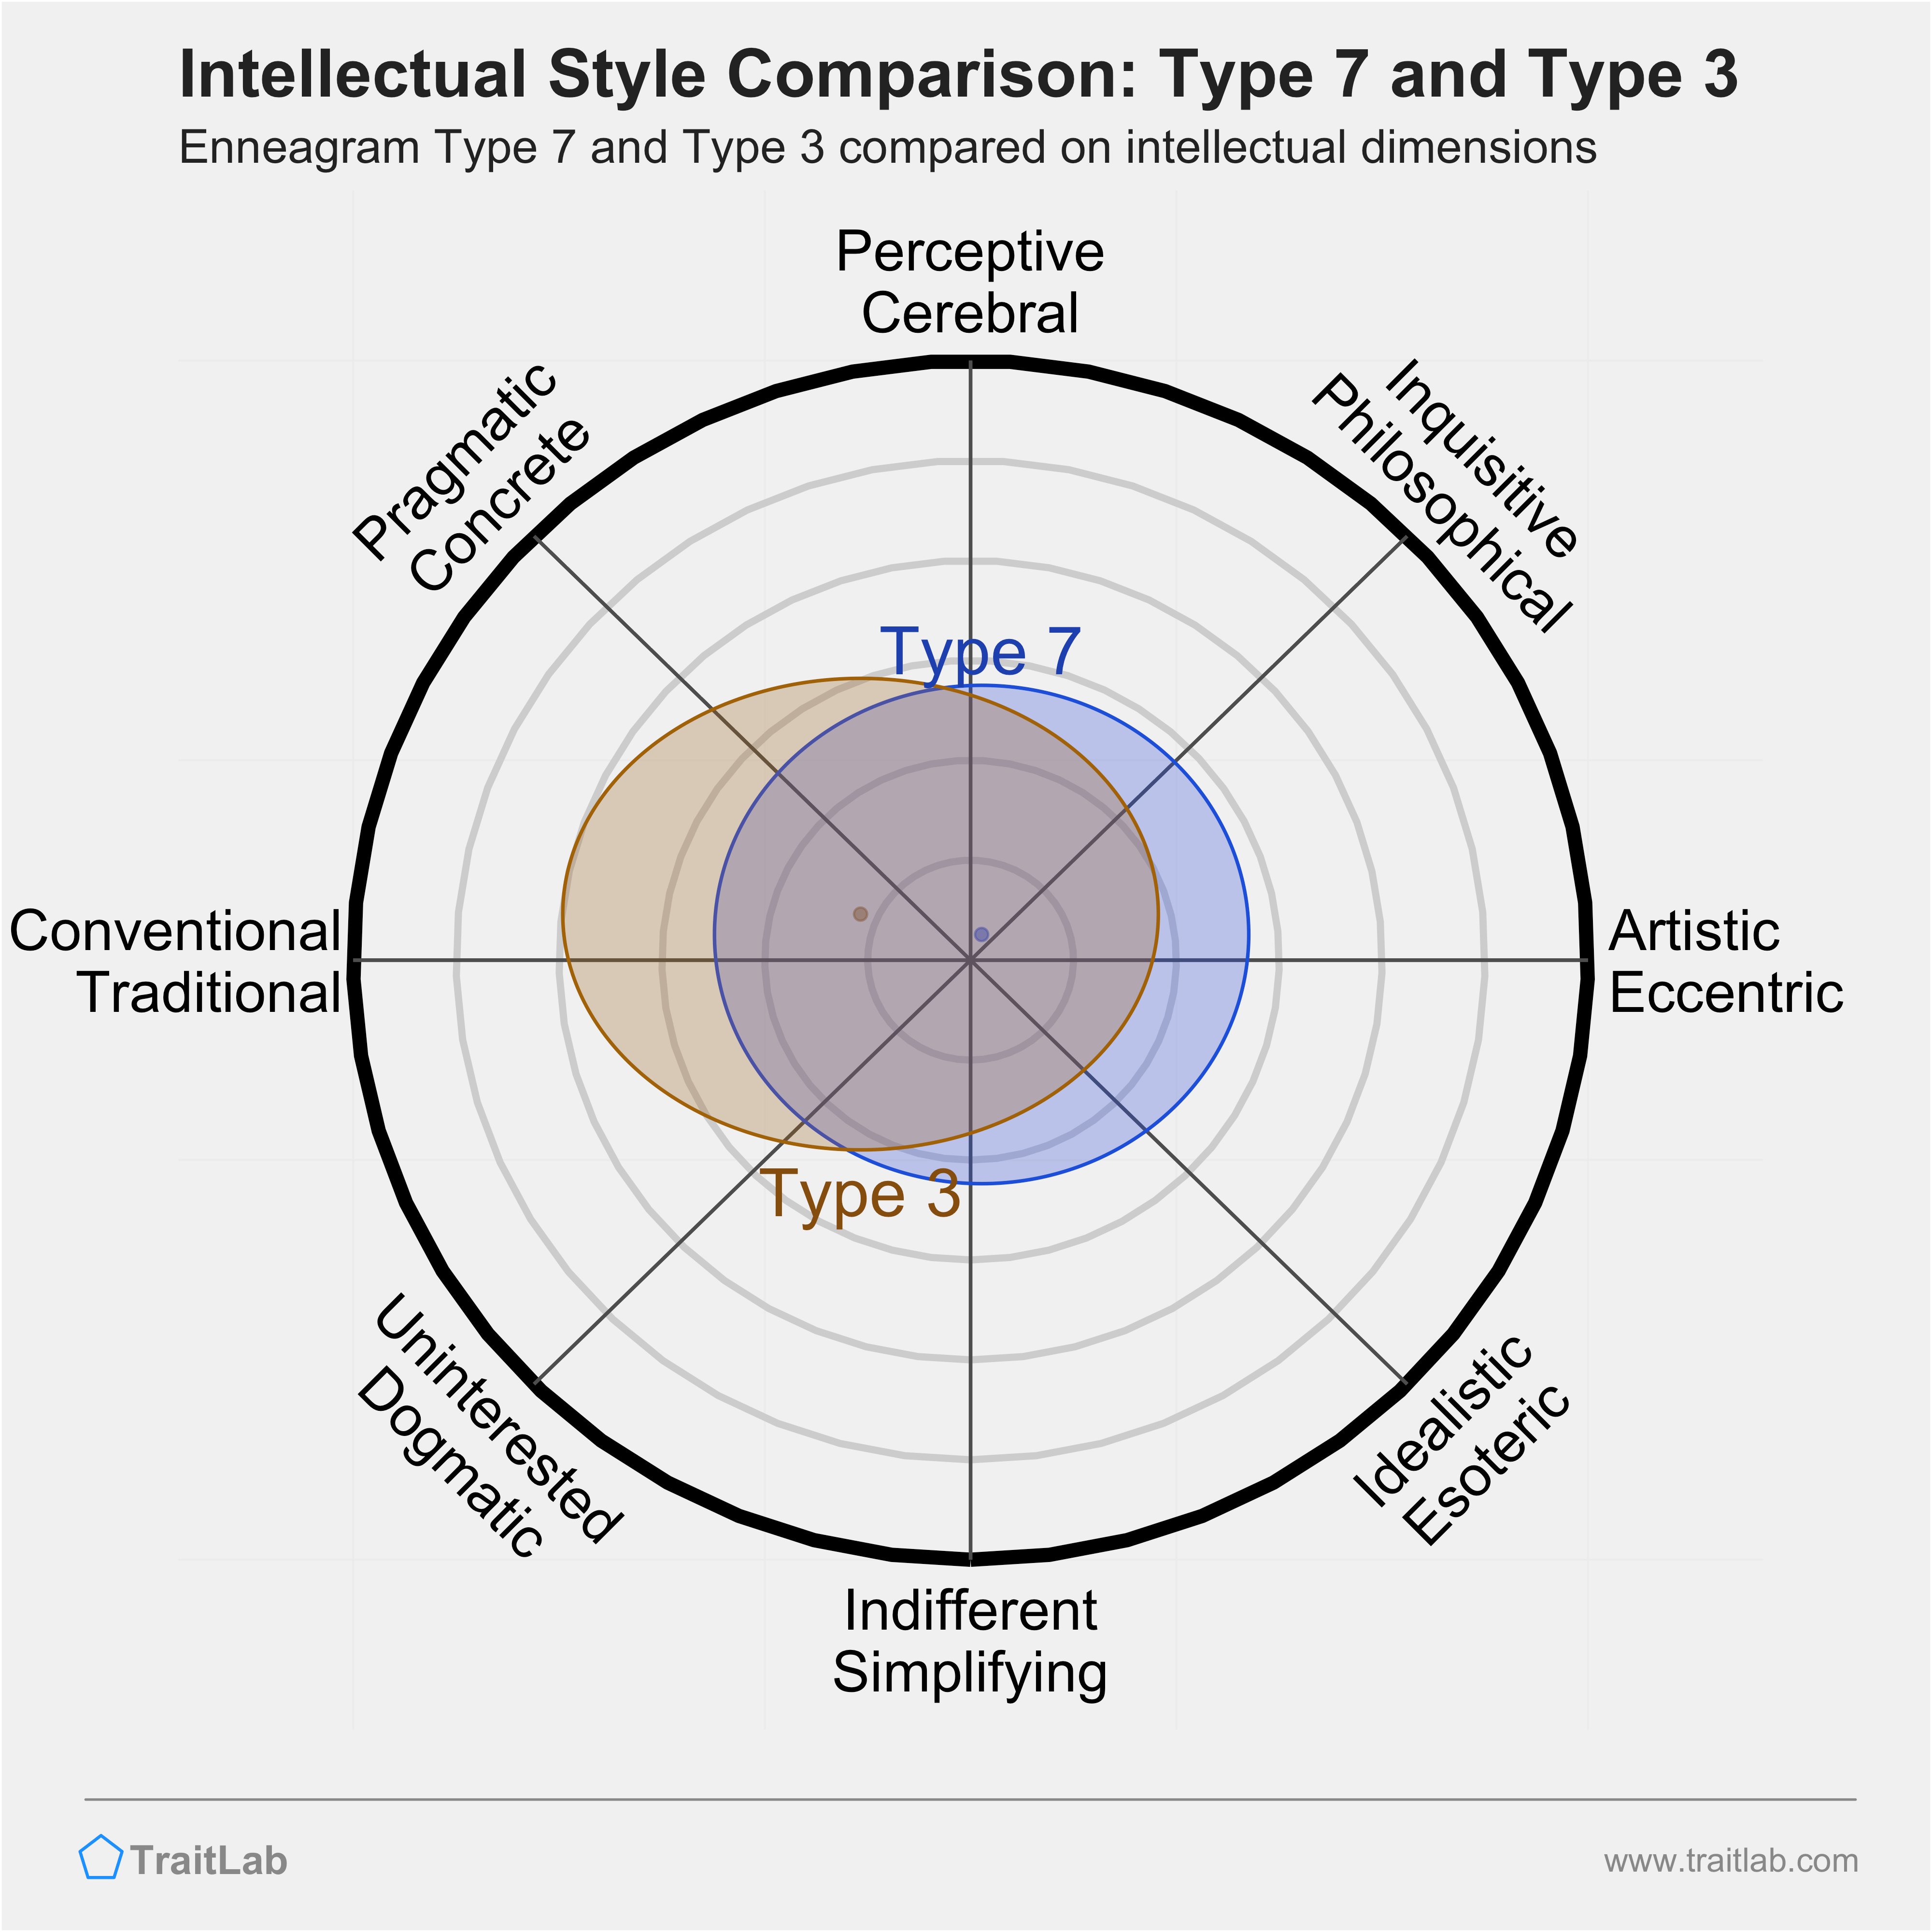 Type 7 and Type 3 comparison across intellectual dimensions